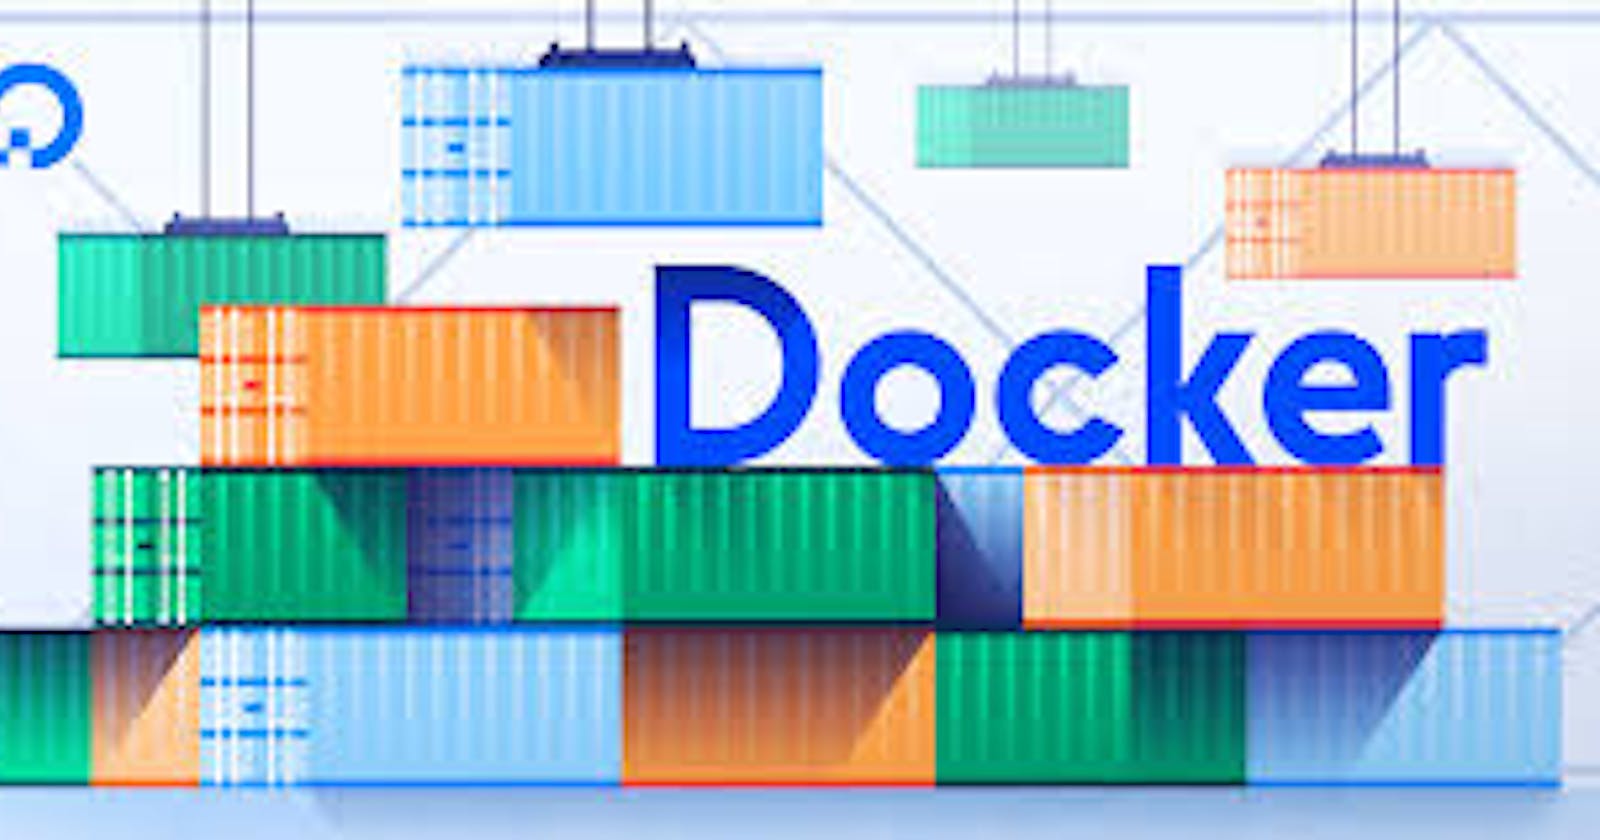 Today we will learn topics related to Docker